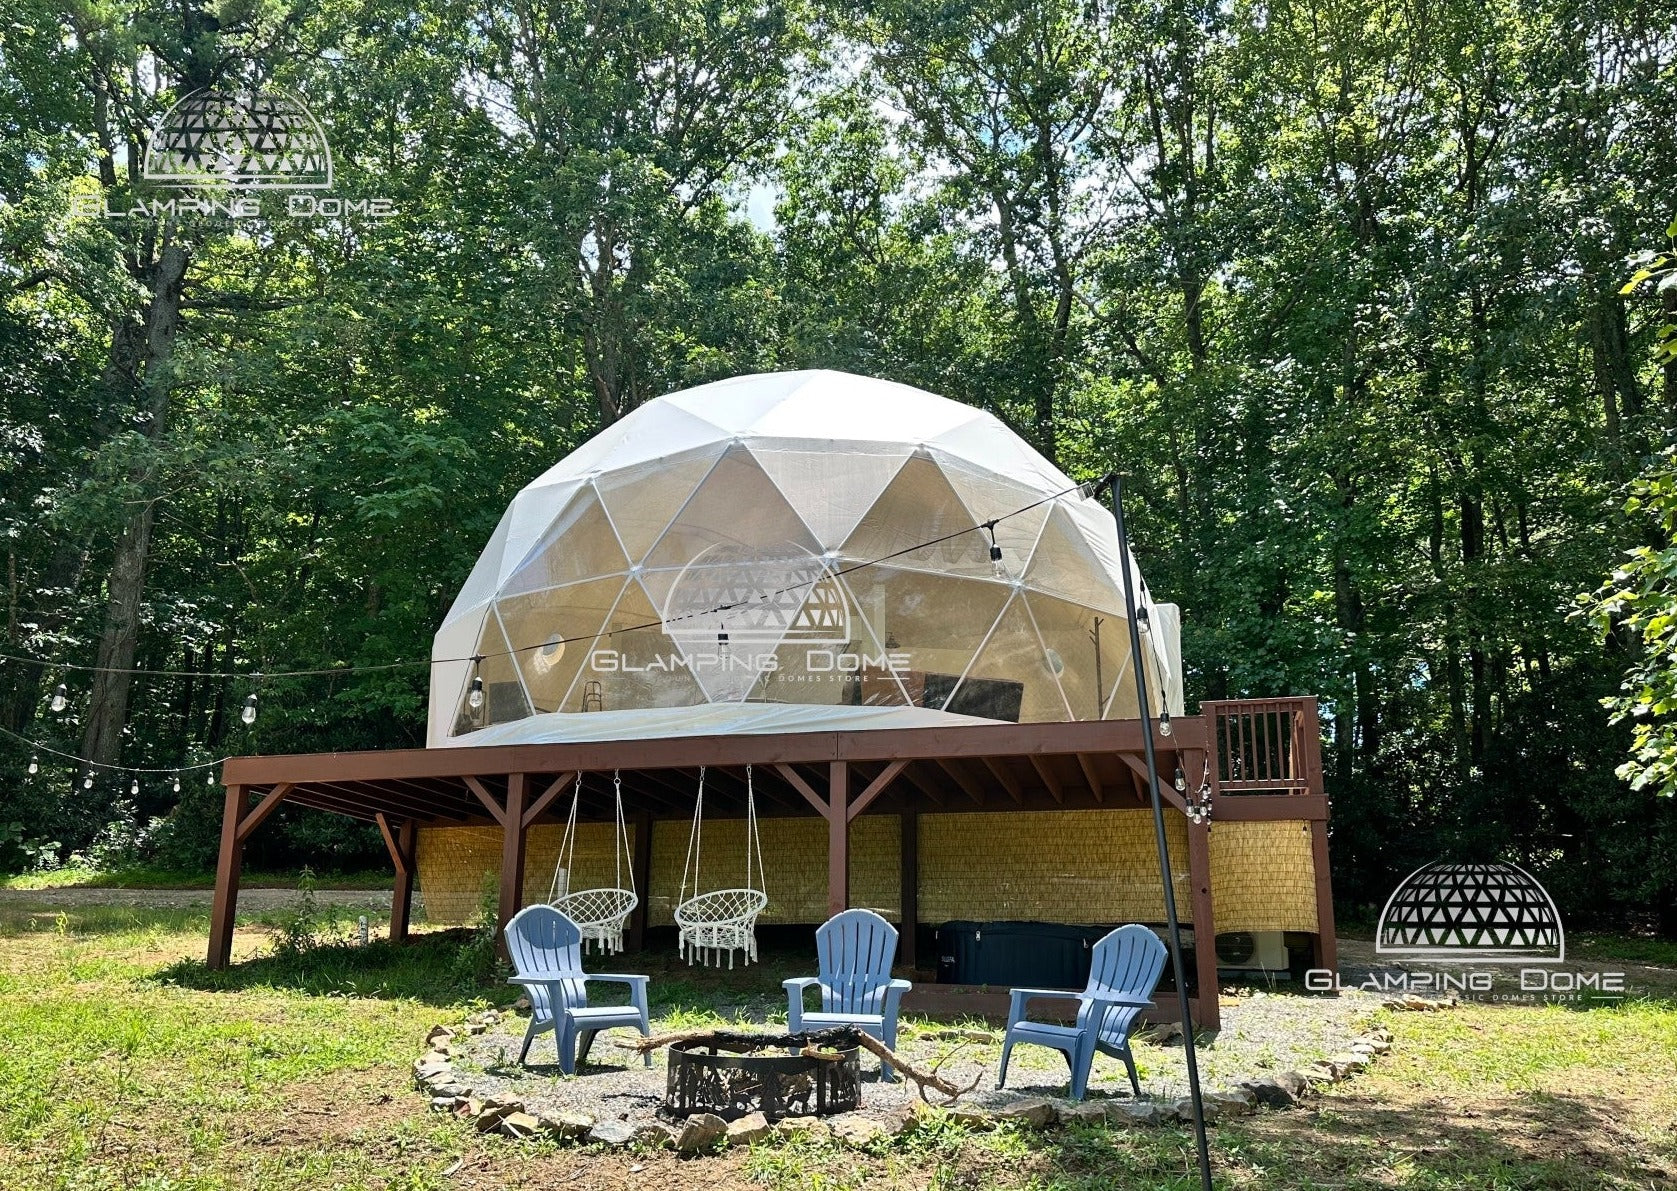 Geodesic Dome Tent for Sale, Geodesic dome Tent